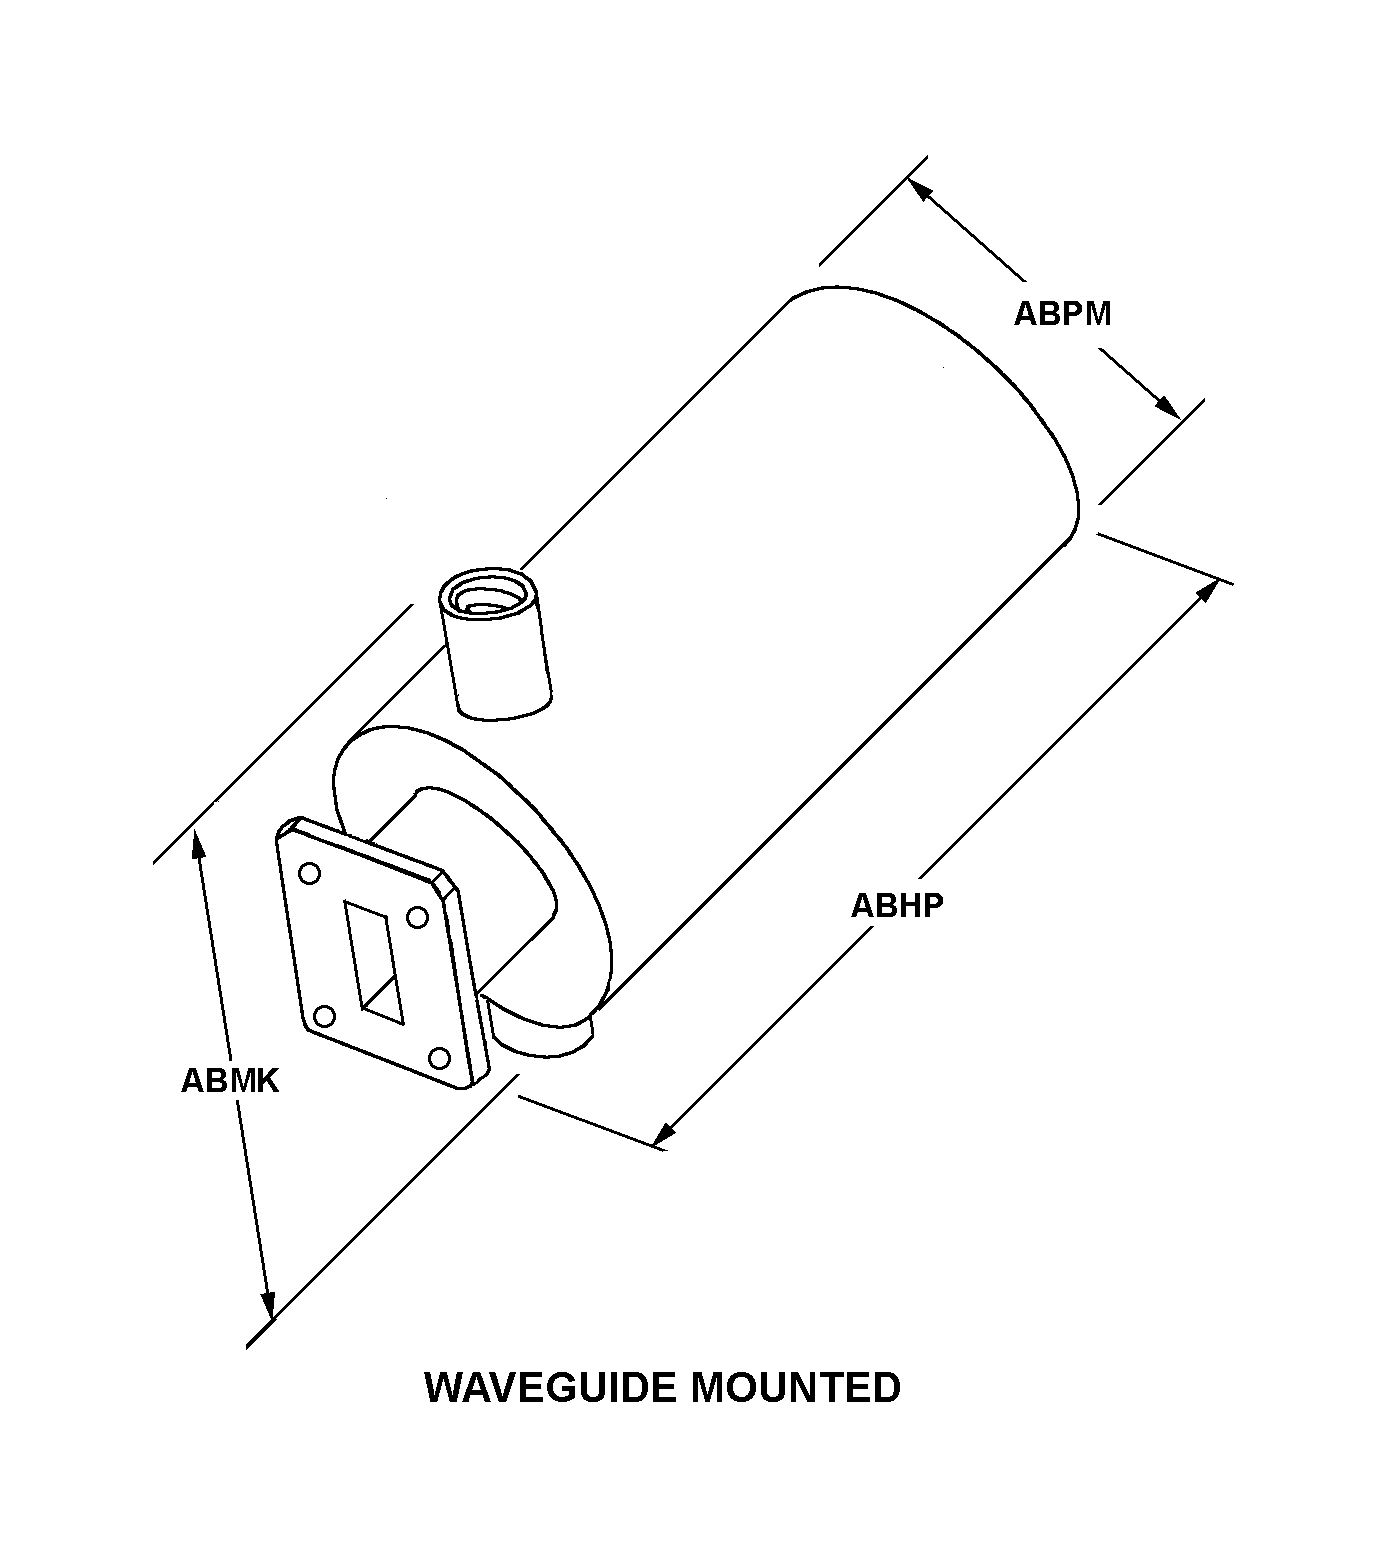 WAVEGUIDE MOUNTED style nsn 5985-01-248-4985